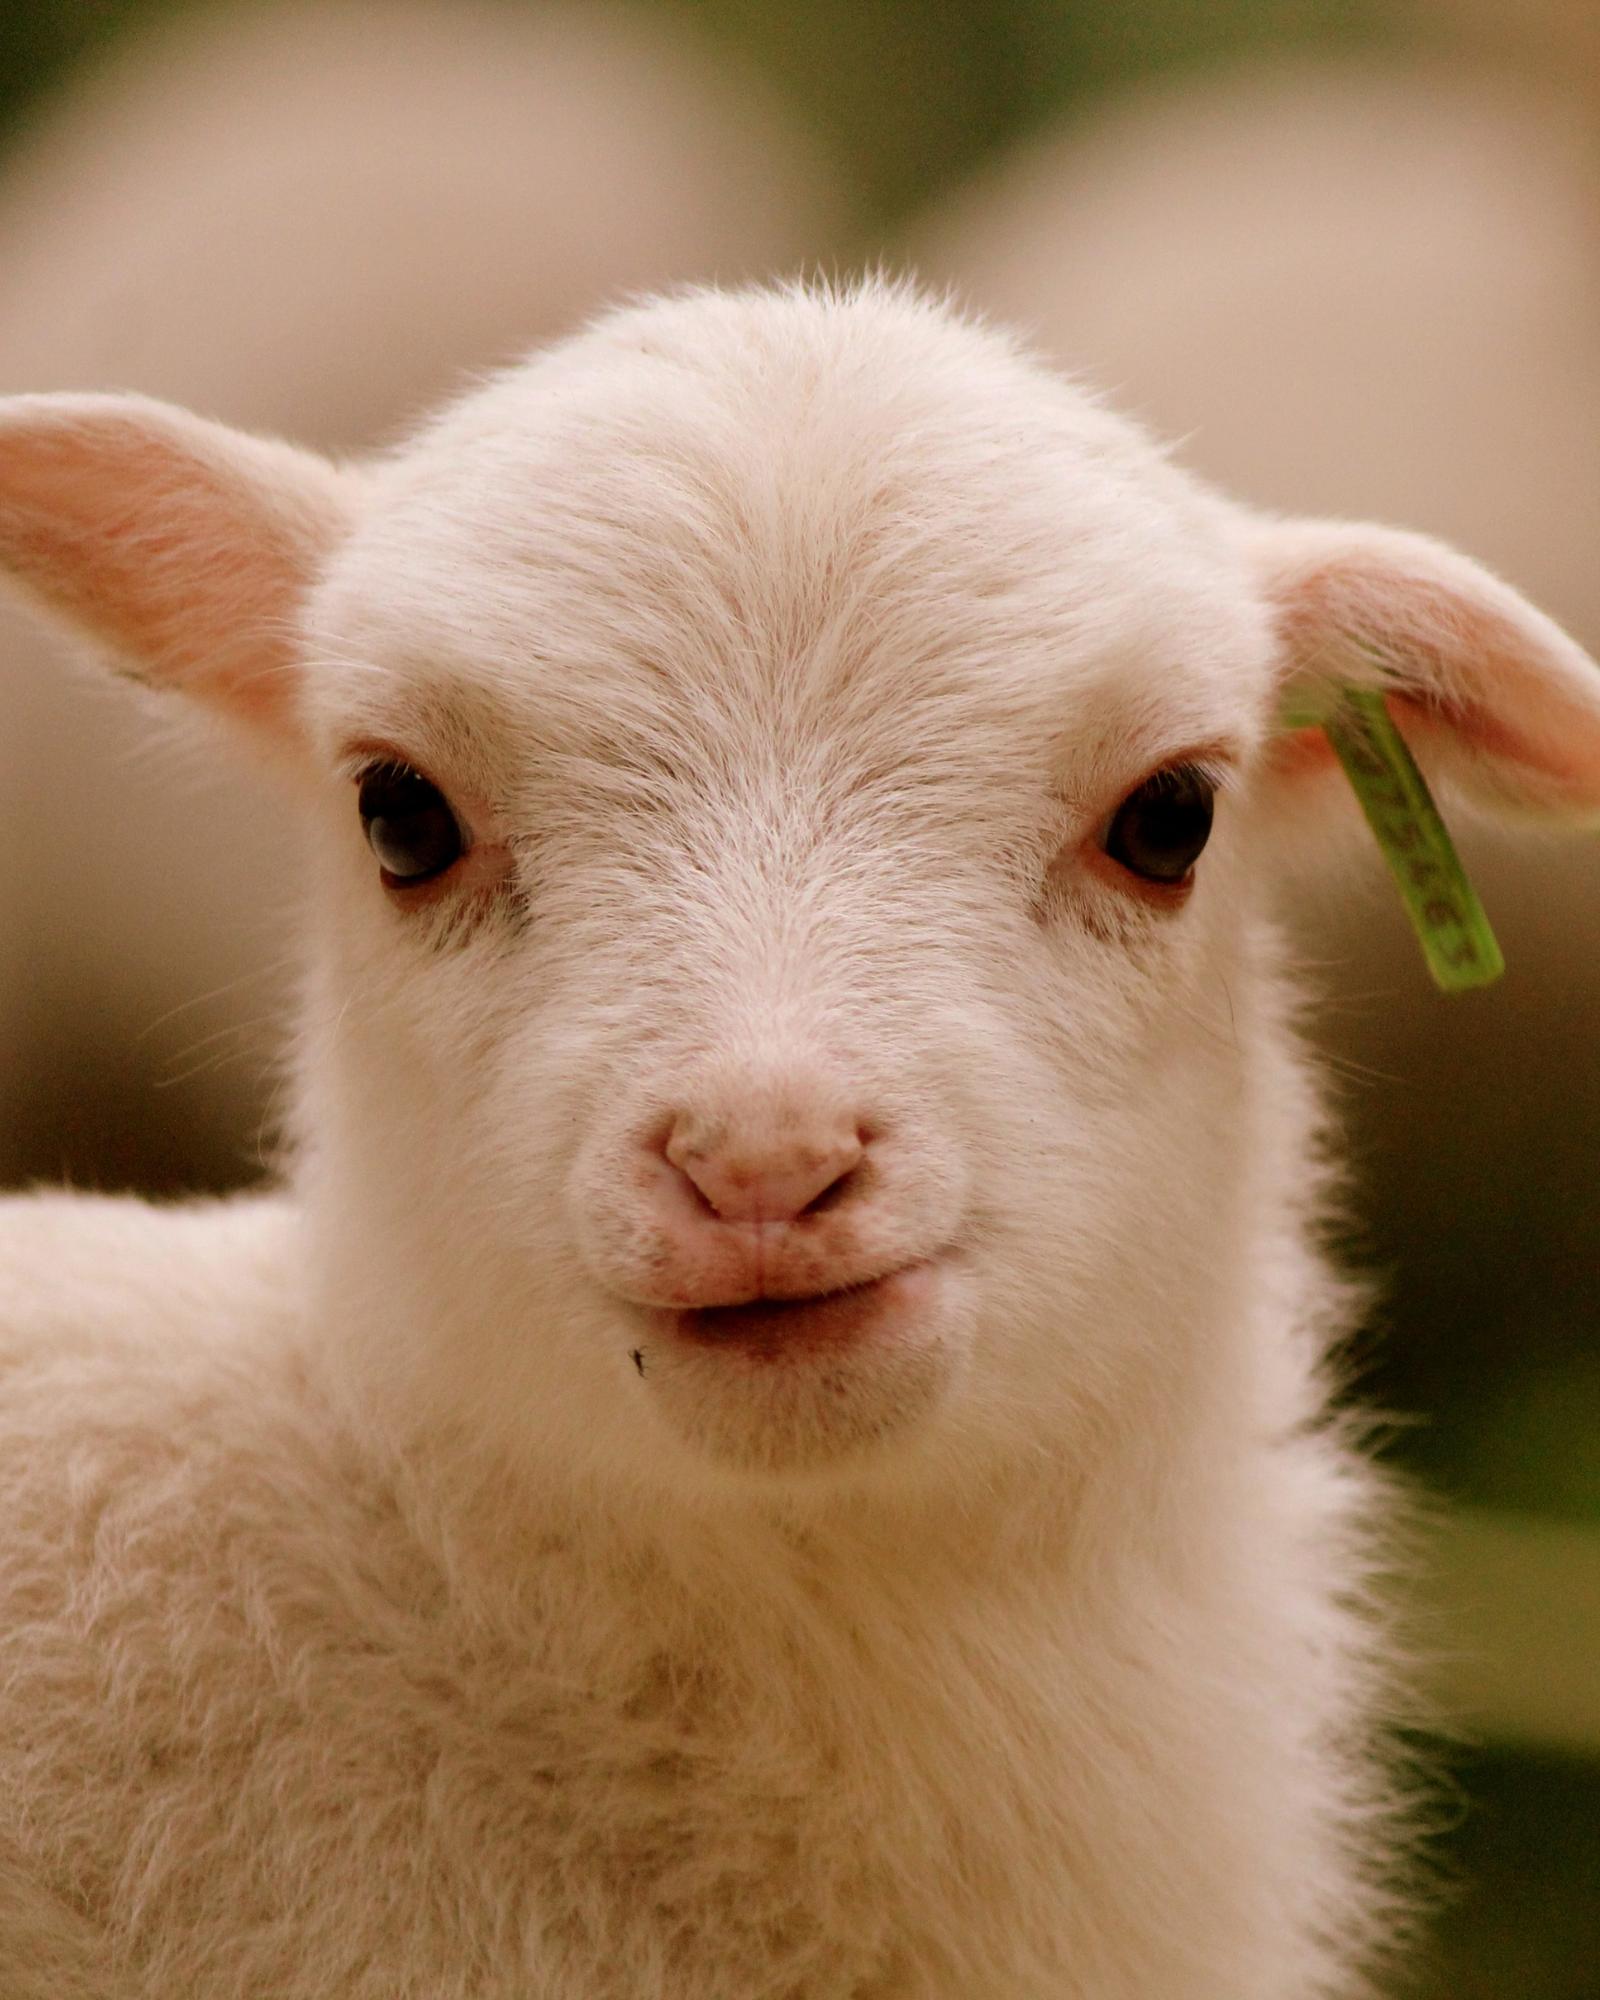 Closeup of tiny lamb with tag in ear